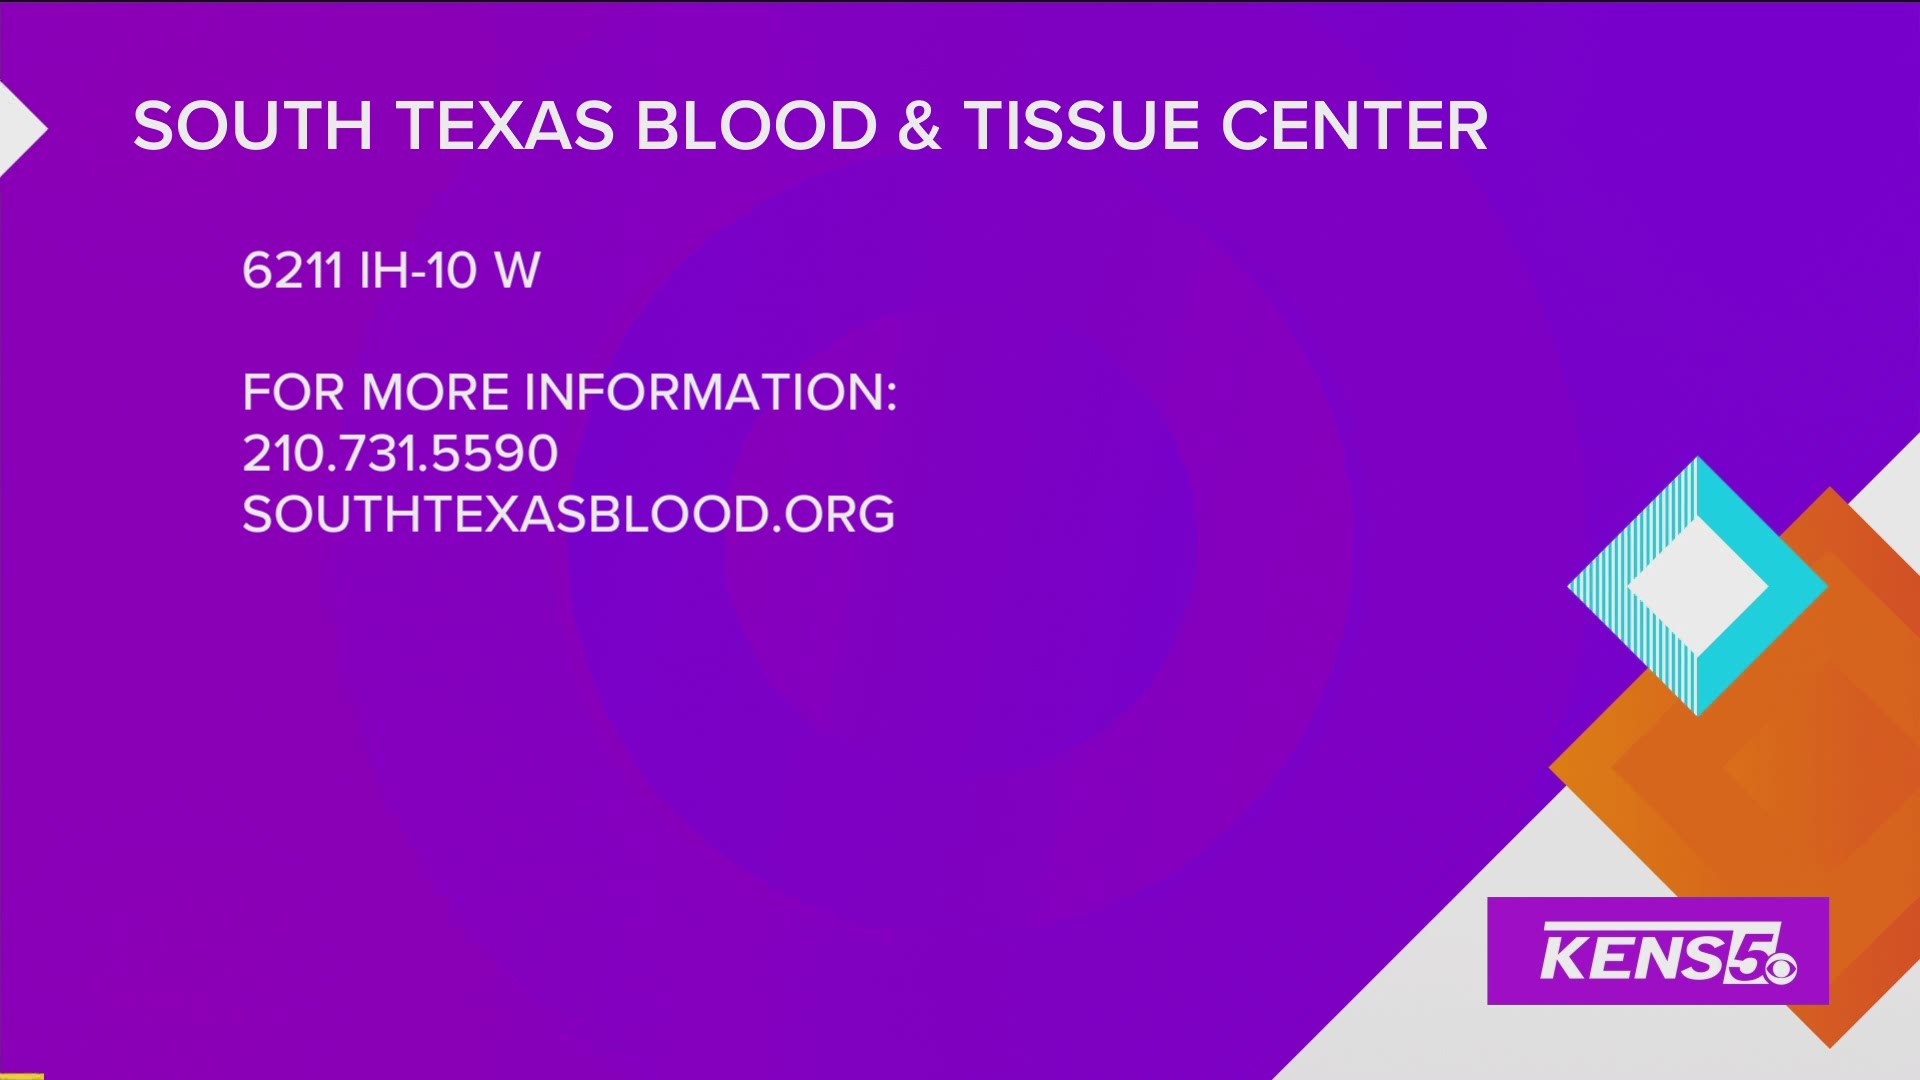 South Texas Blood & Tissue is in need of blood donations, especially during this holiday season.